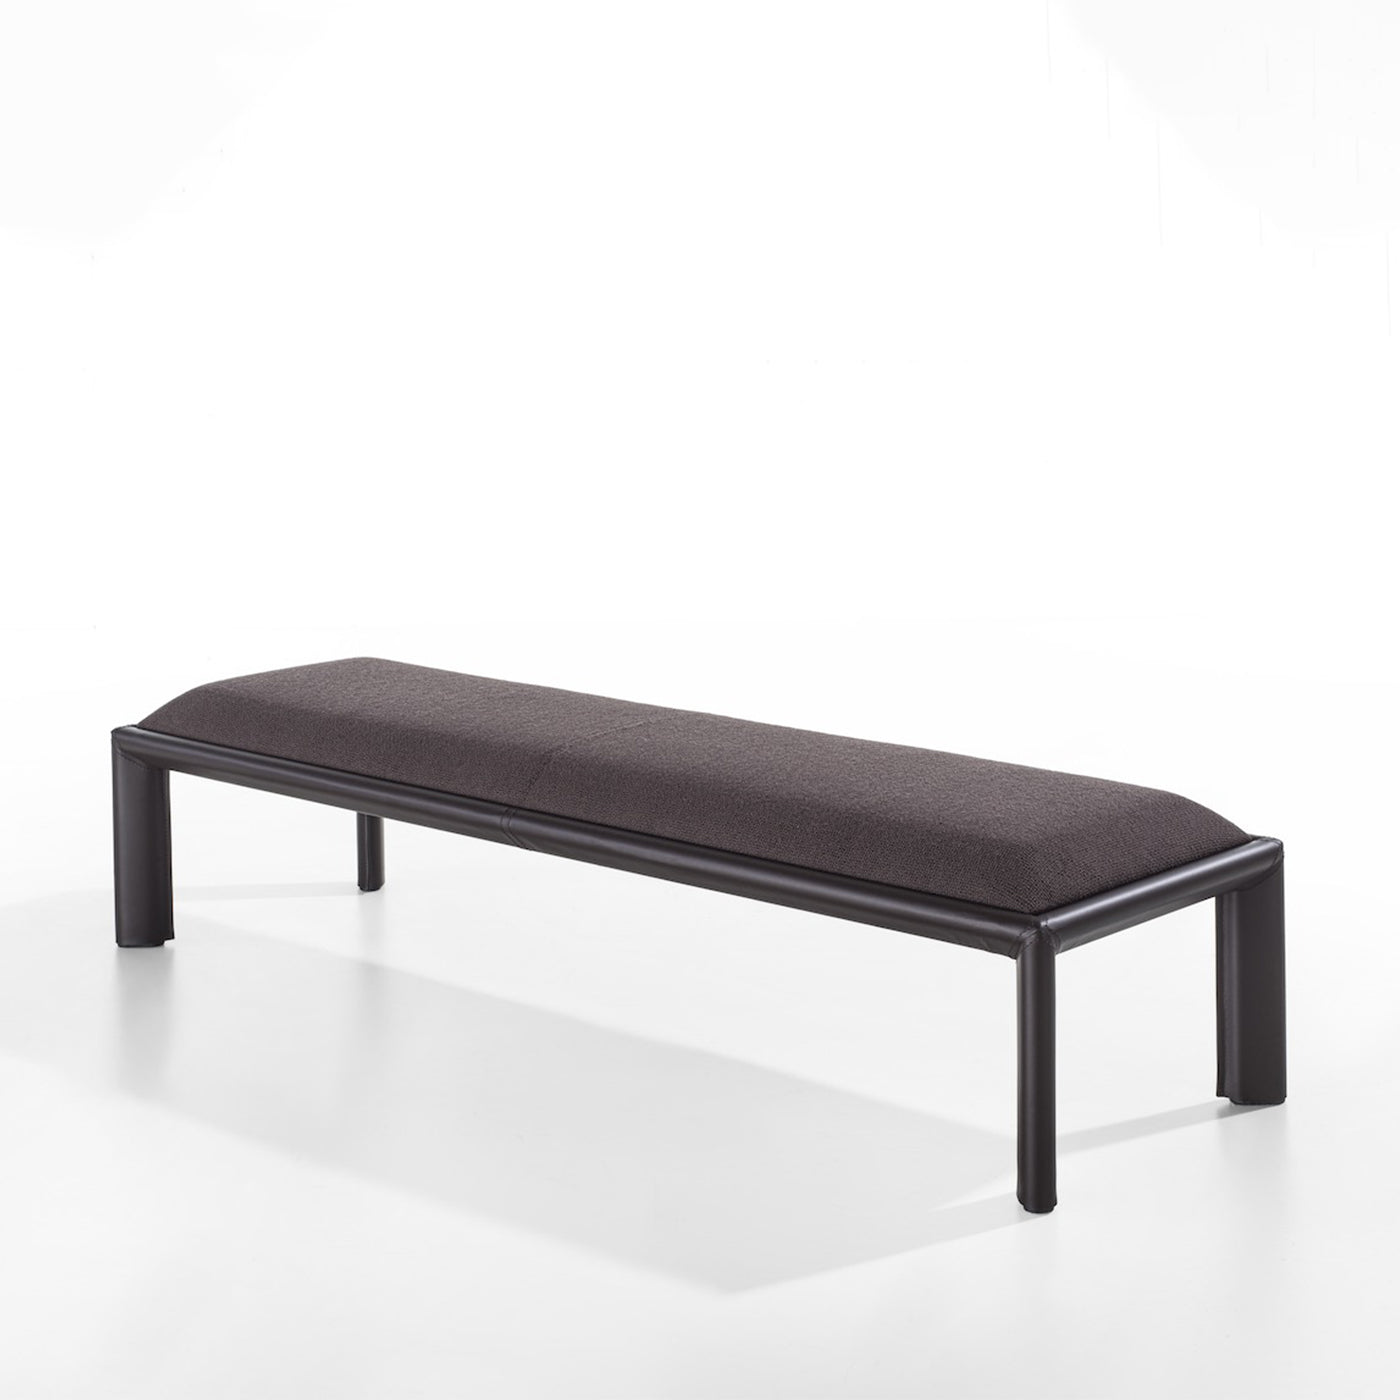 Milano Brown Leather Bench - Alternative view 1